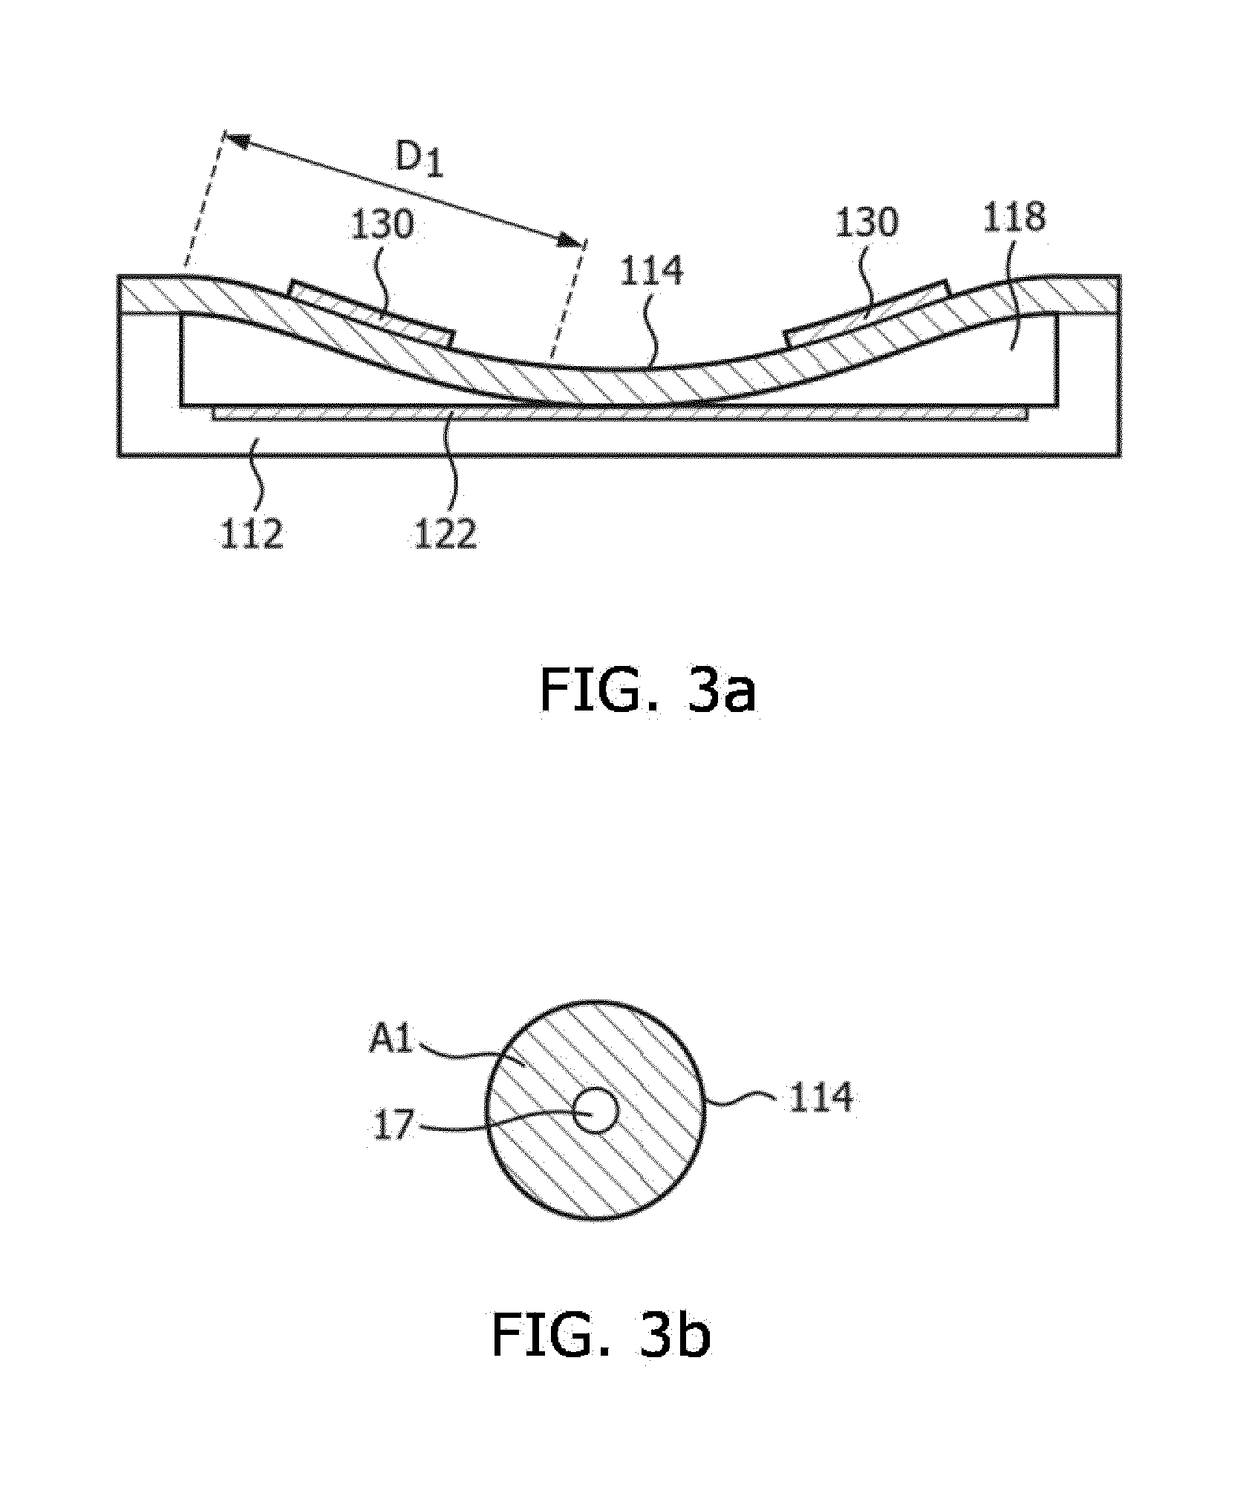 Ultrasound system and method